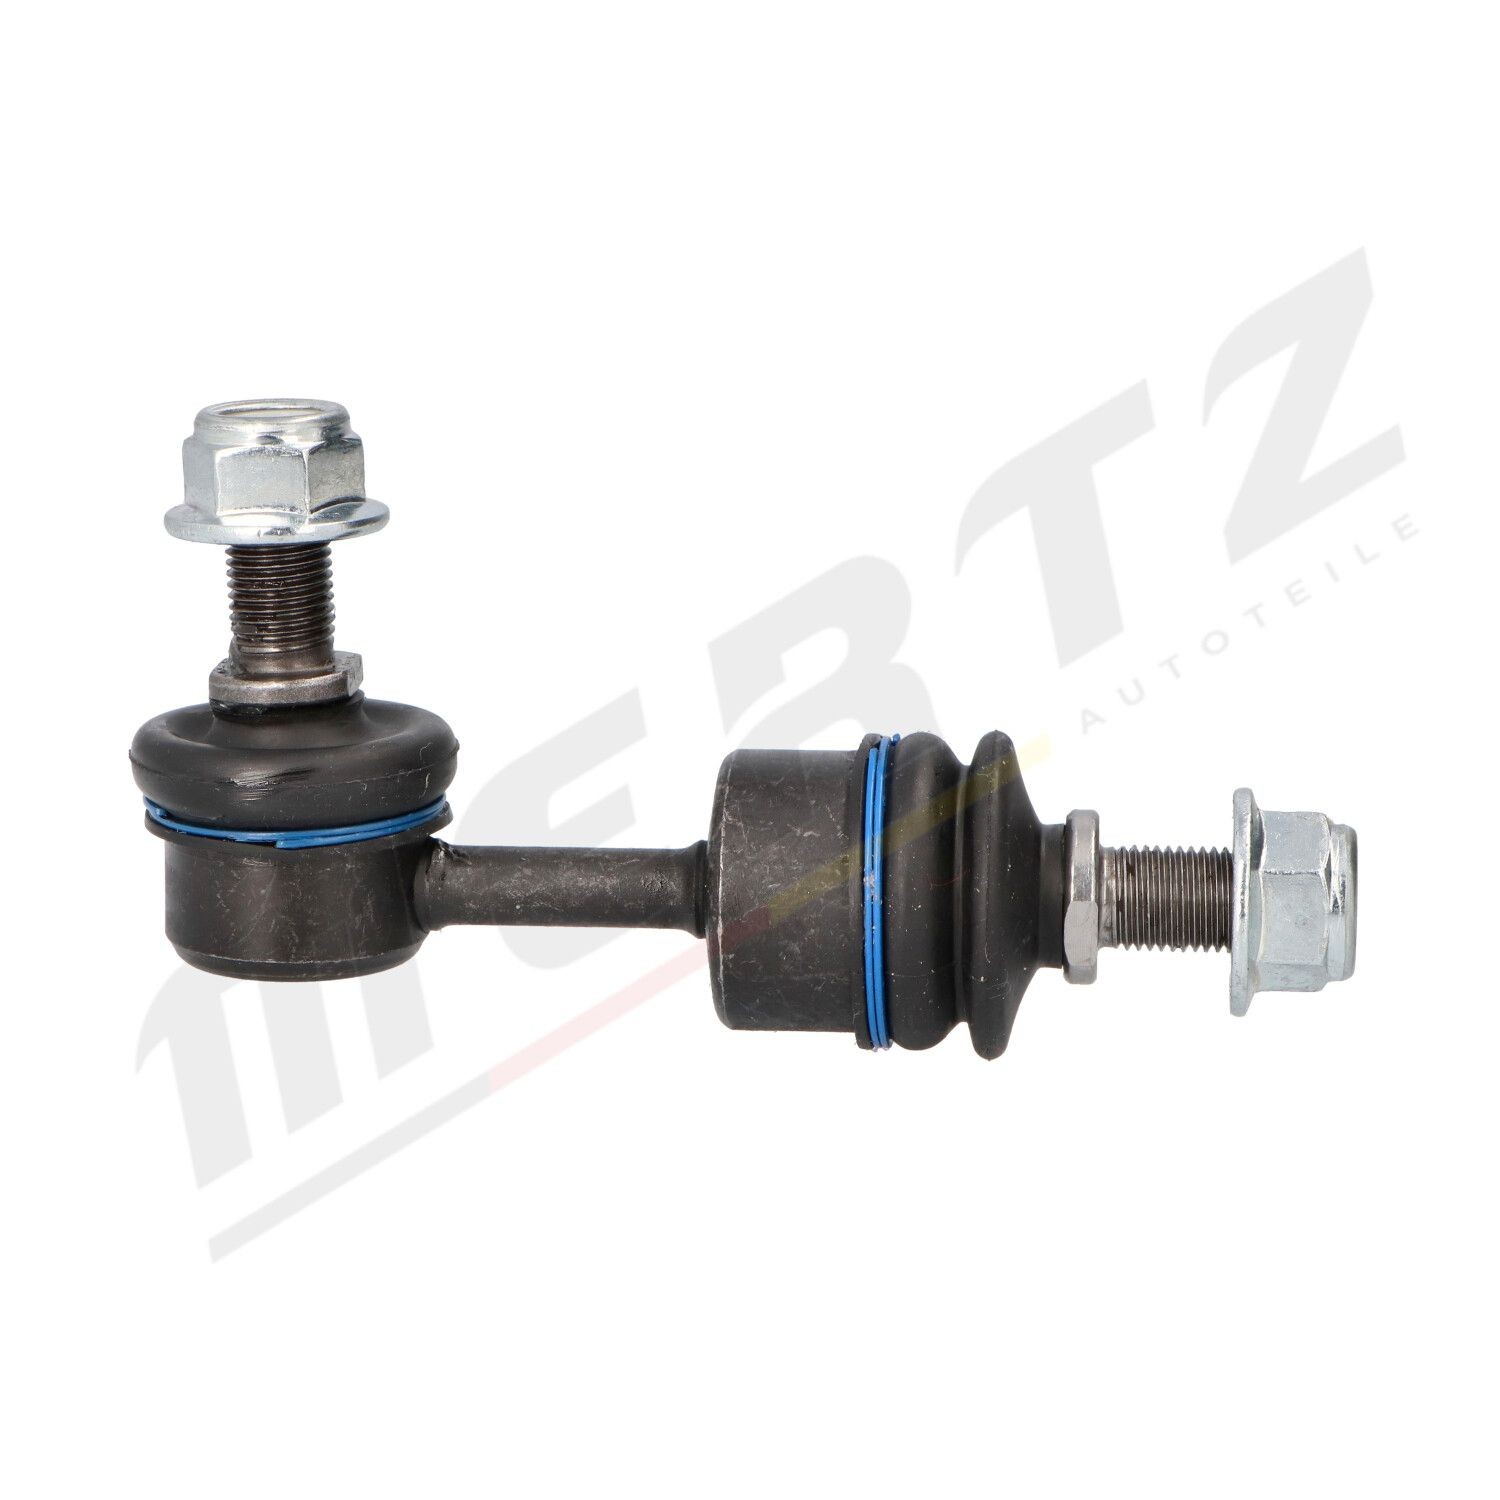 Control arms MERTZ with nut, Rear Axle Left, Rear Axle Right, Steel, Coupling Rod - M-S1226